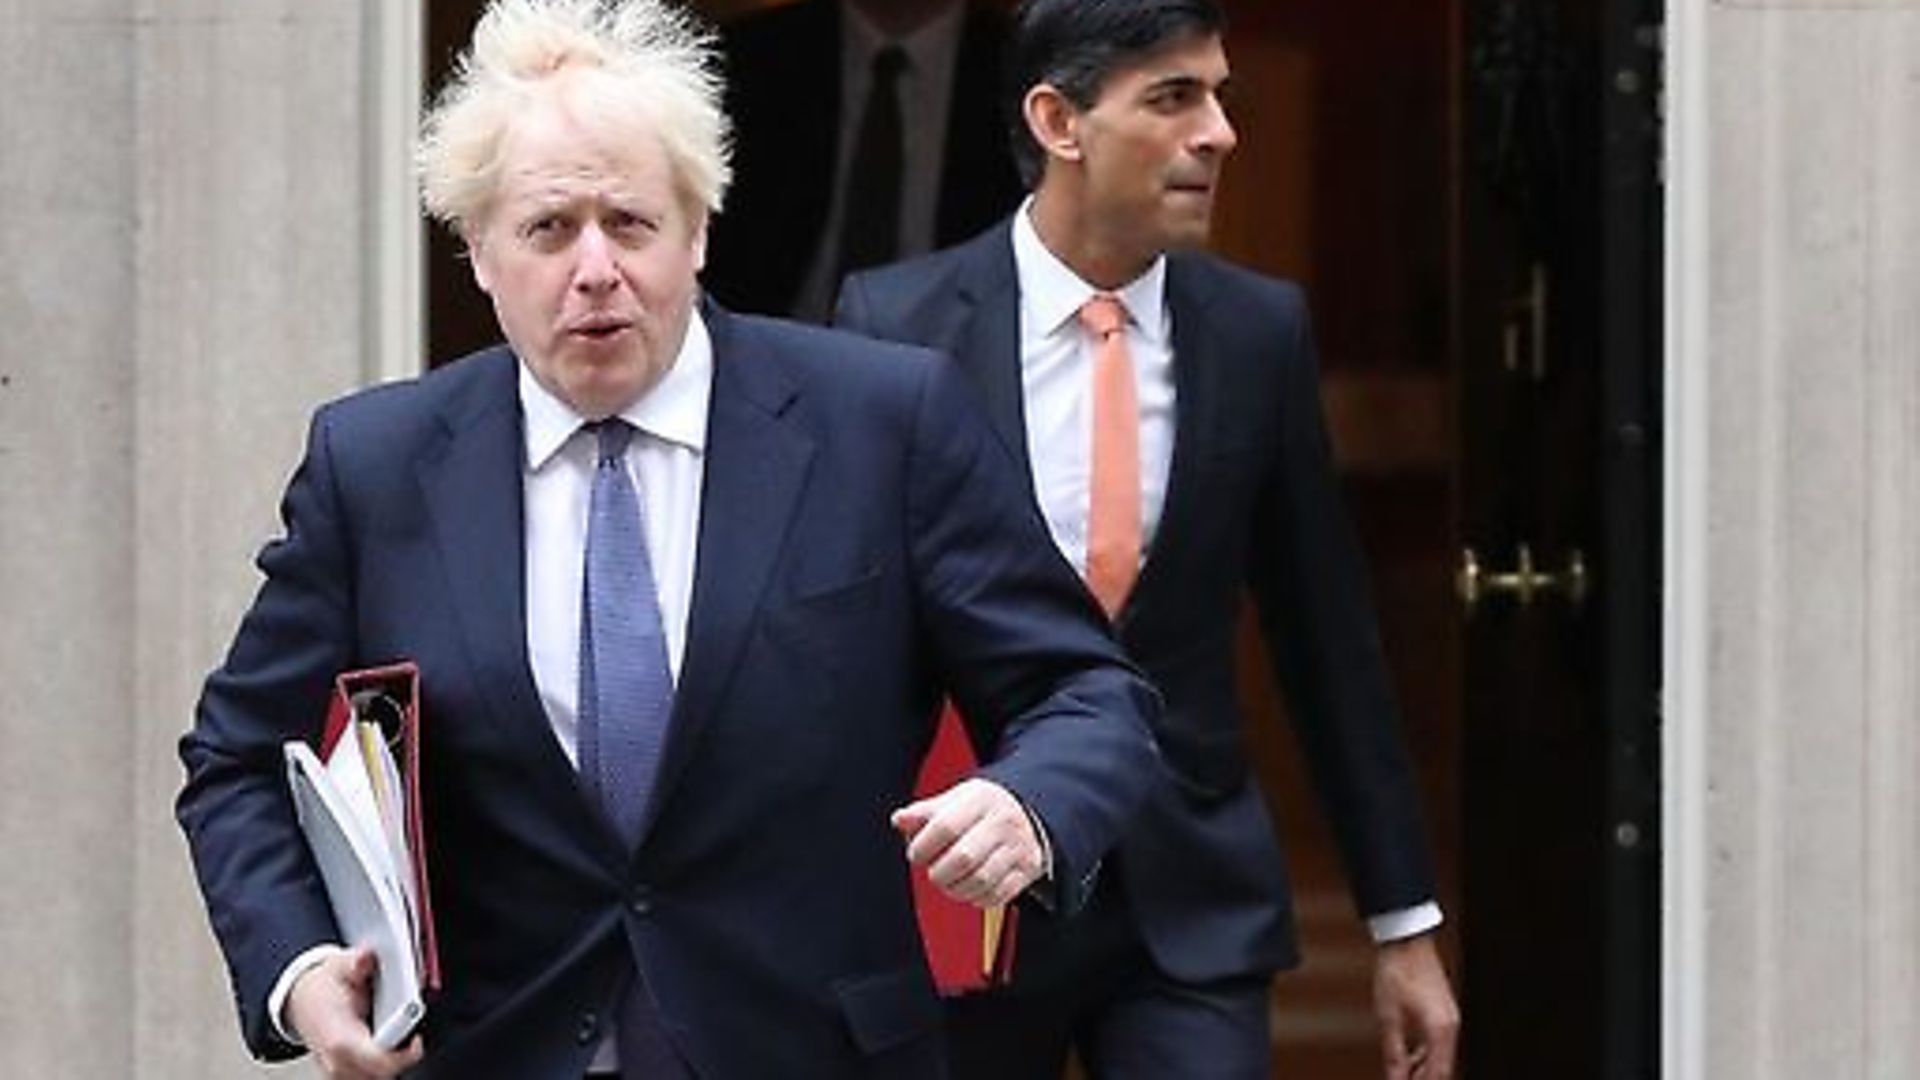 Prime Minister Boris Johnson (left) and Chancellor of the Exchequer Rishi Sunak leave 10 Downing Street London, ahead of a Cabinet meeting at the Foreign and Commonwealth Office. - Credit: PA